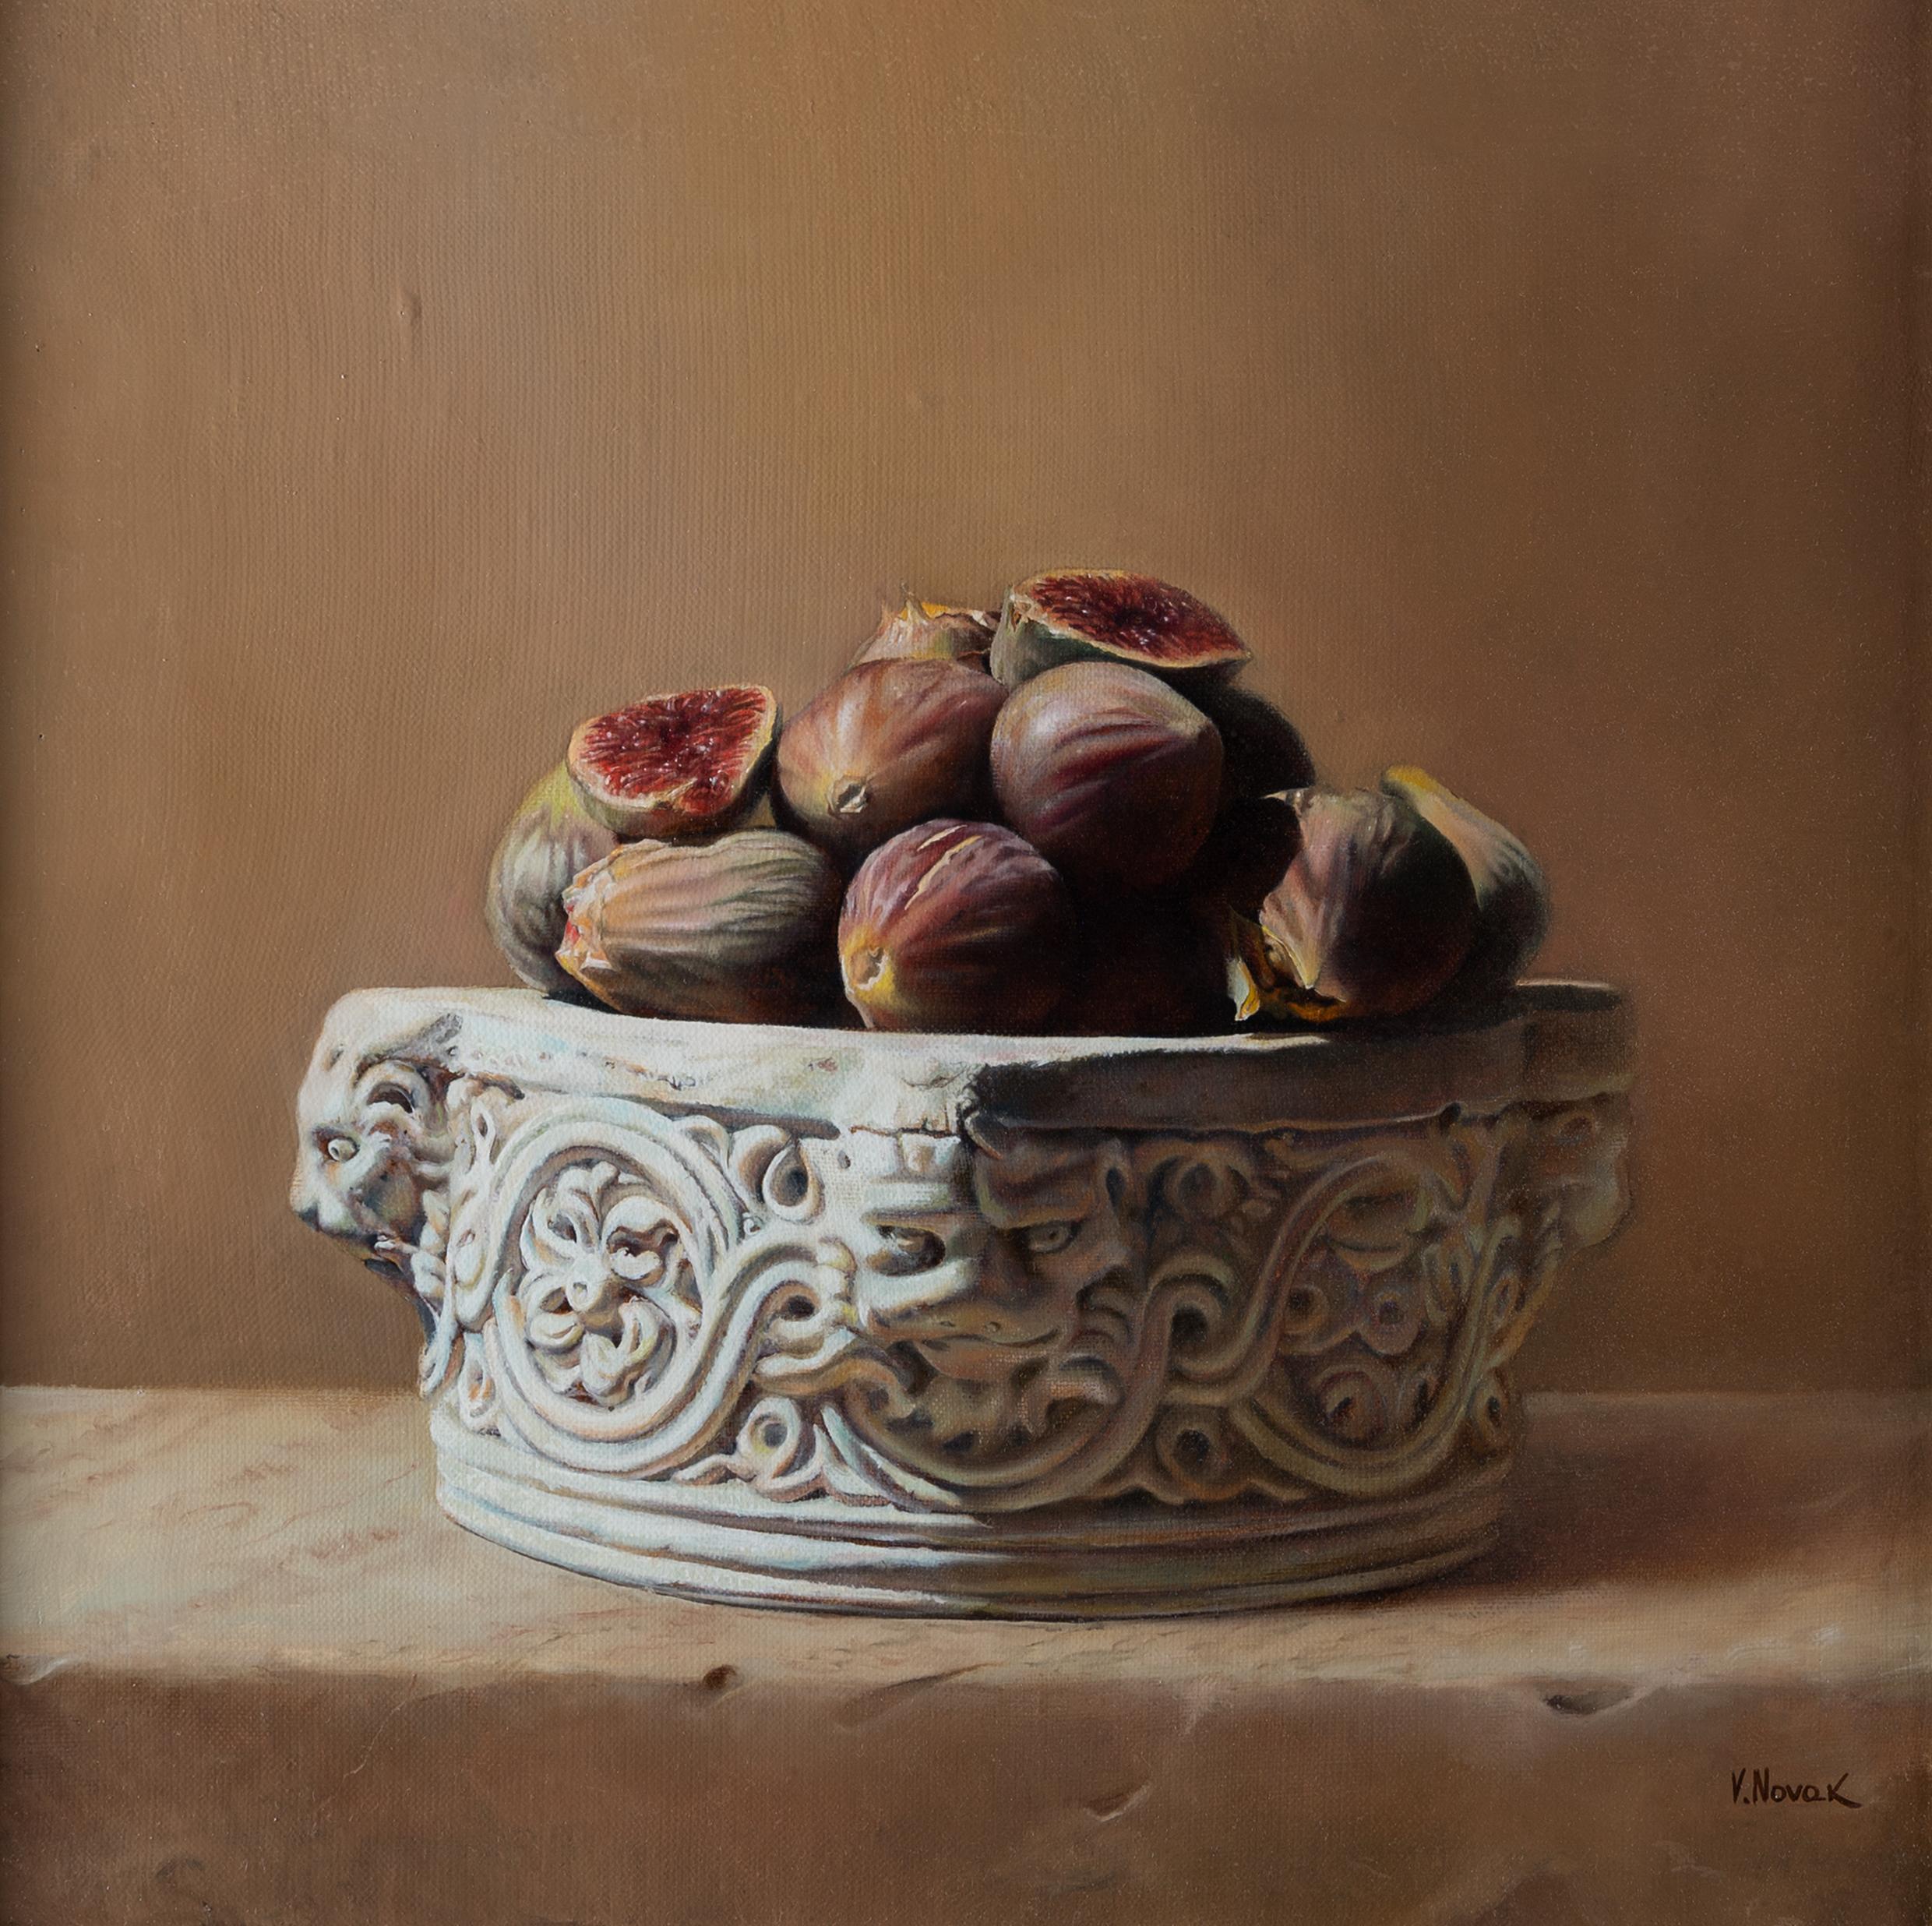 "Umbria" Ornate Bowl with Figs Still Life Oil Painting